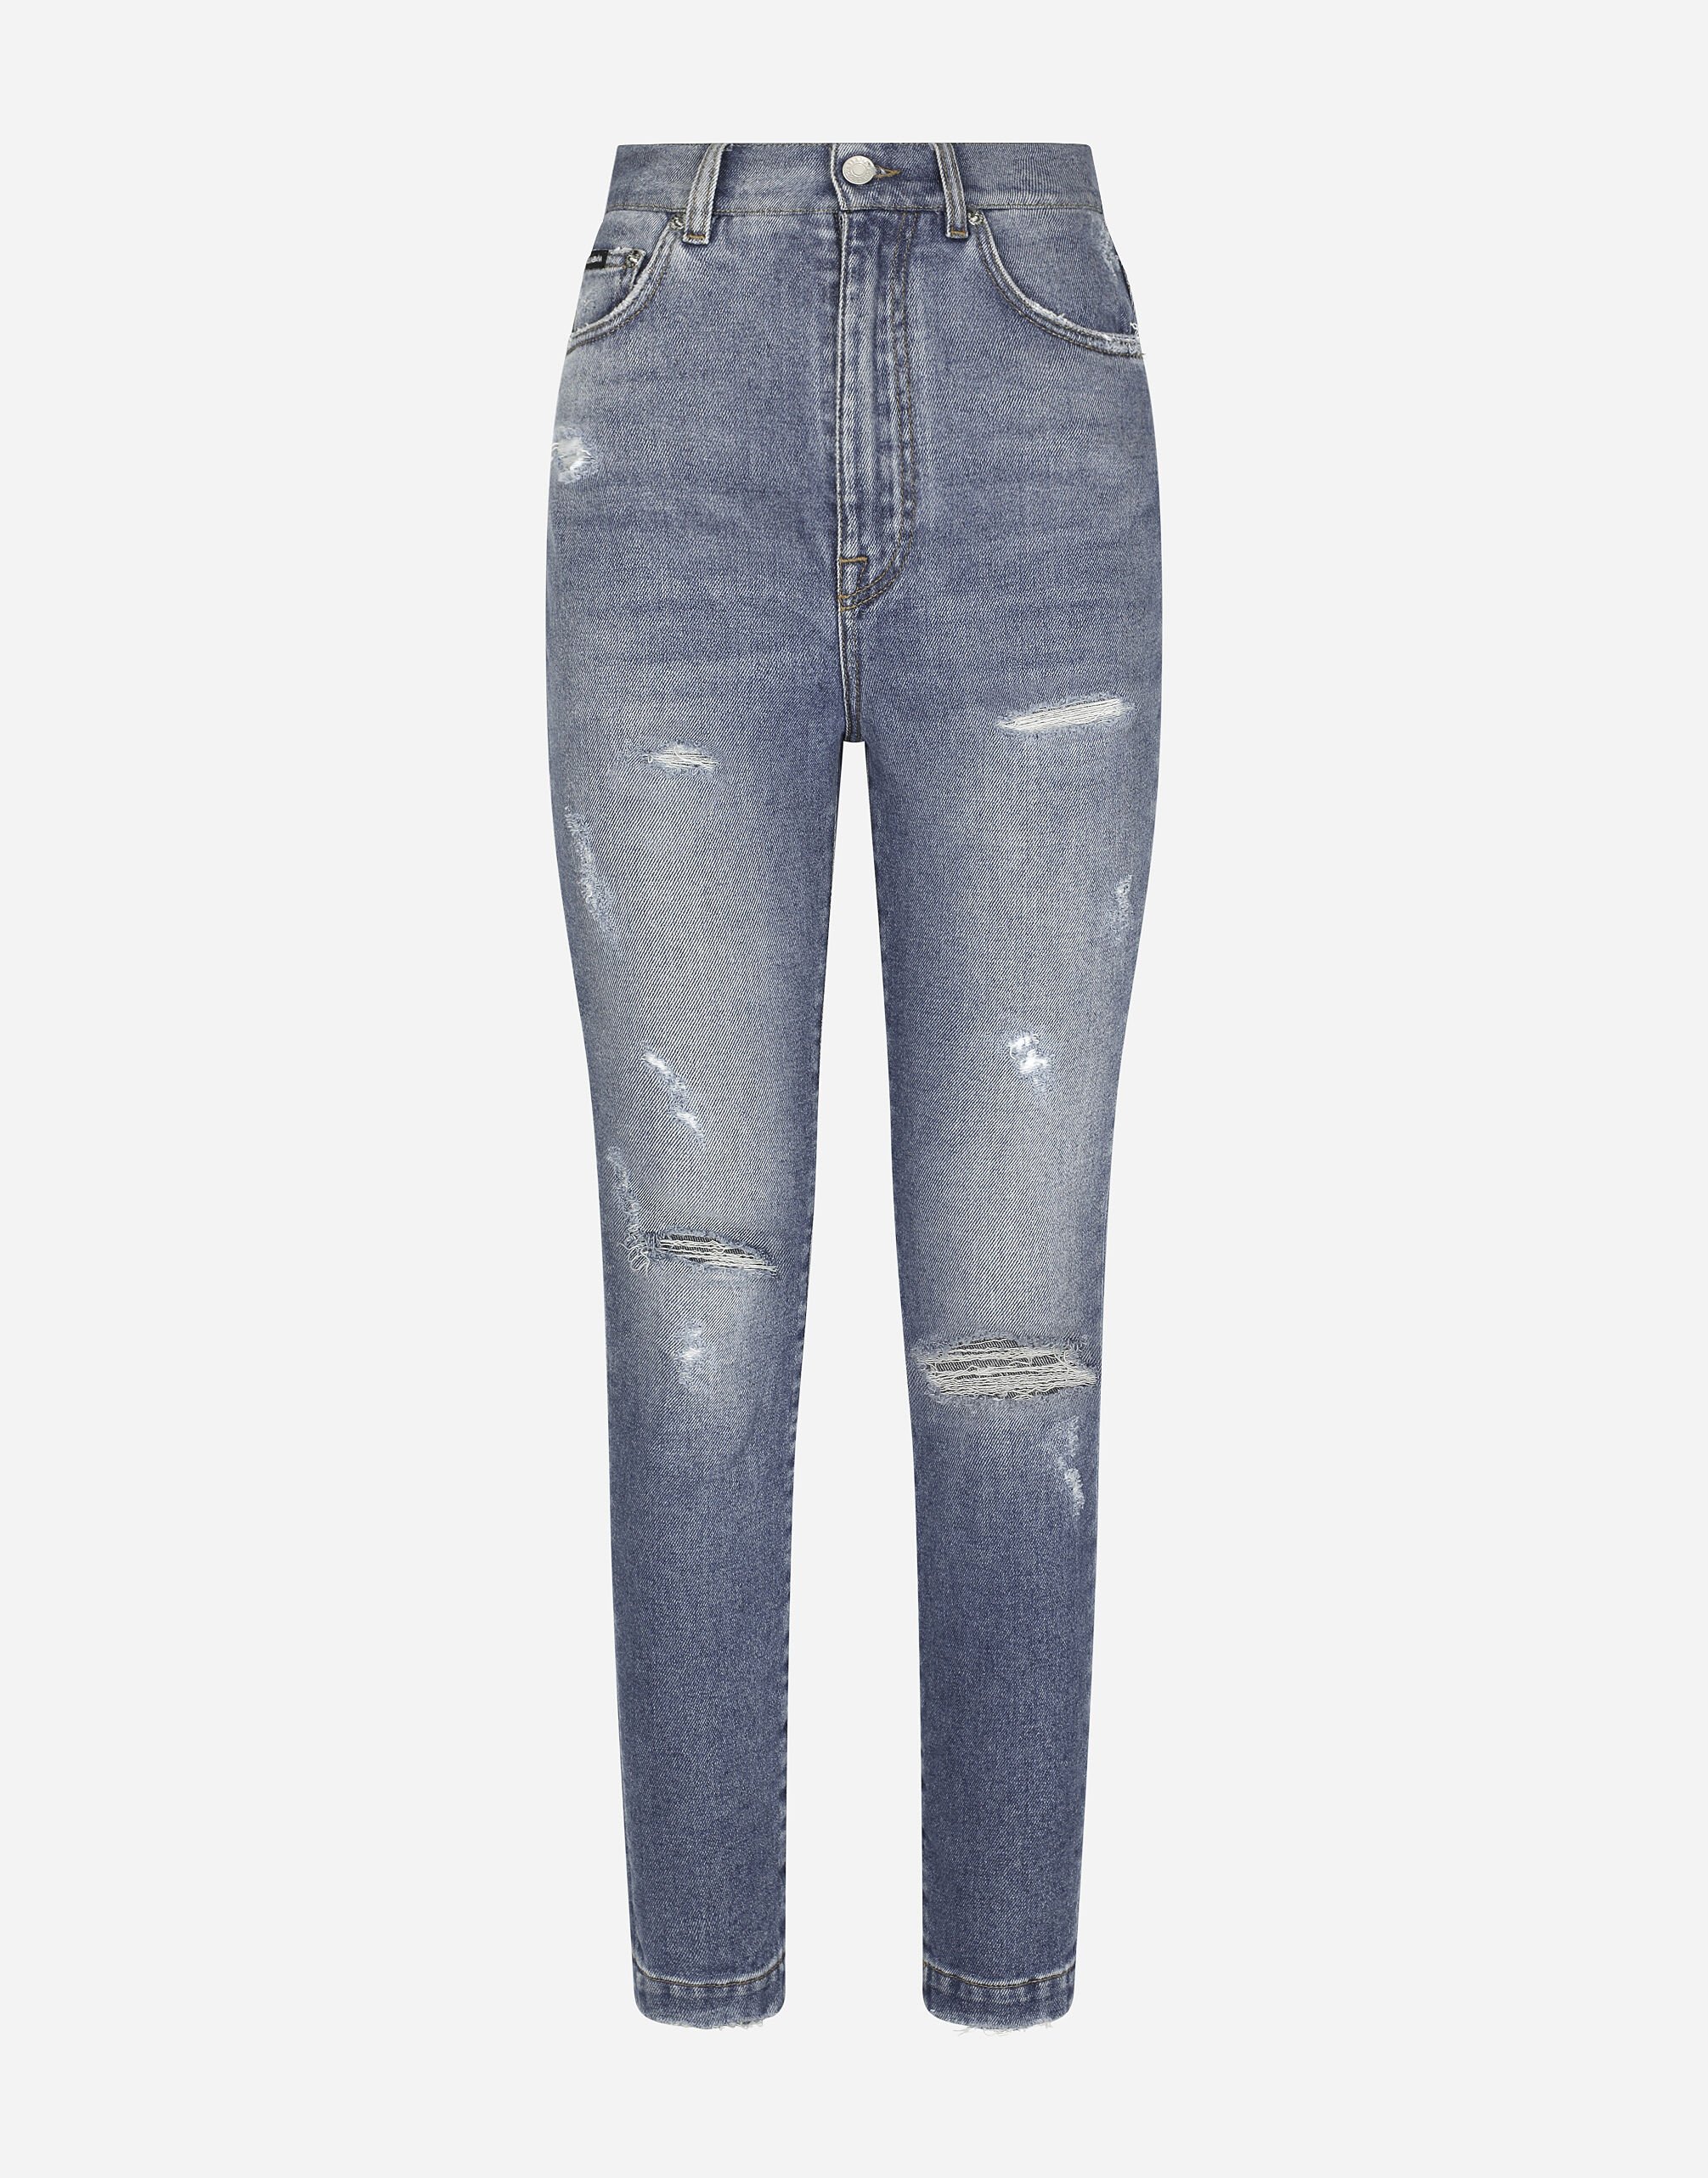 Dolce & Gabbana Grace jeans with ripped details Animal Print FTBWQTFSSEP